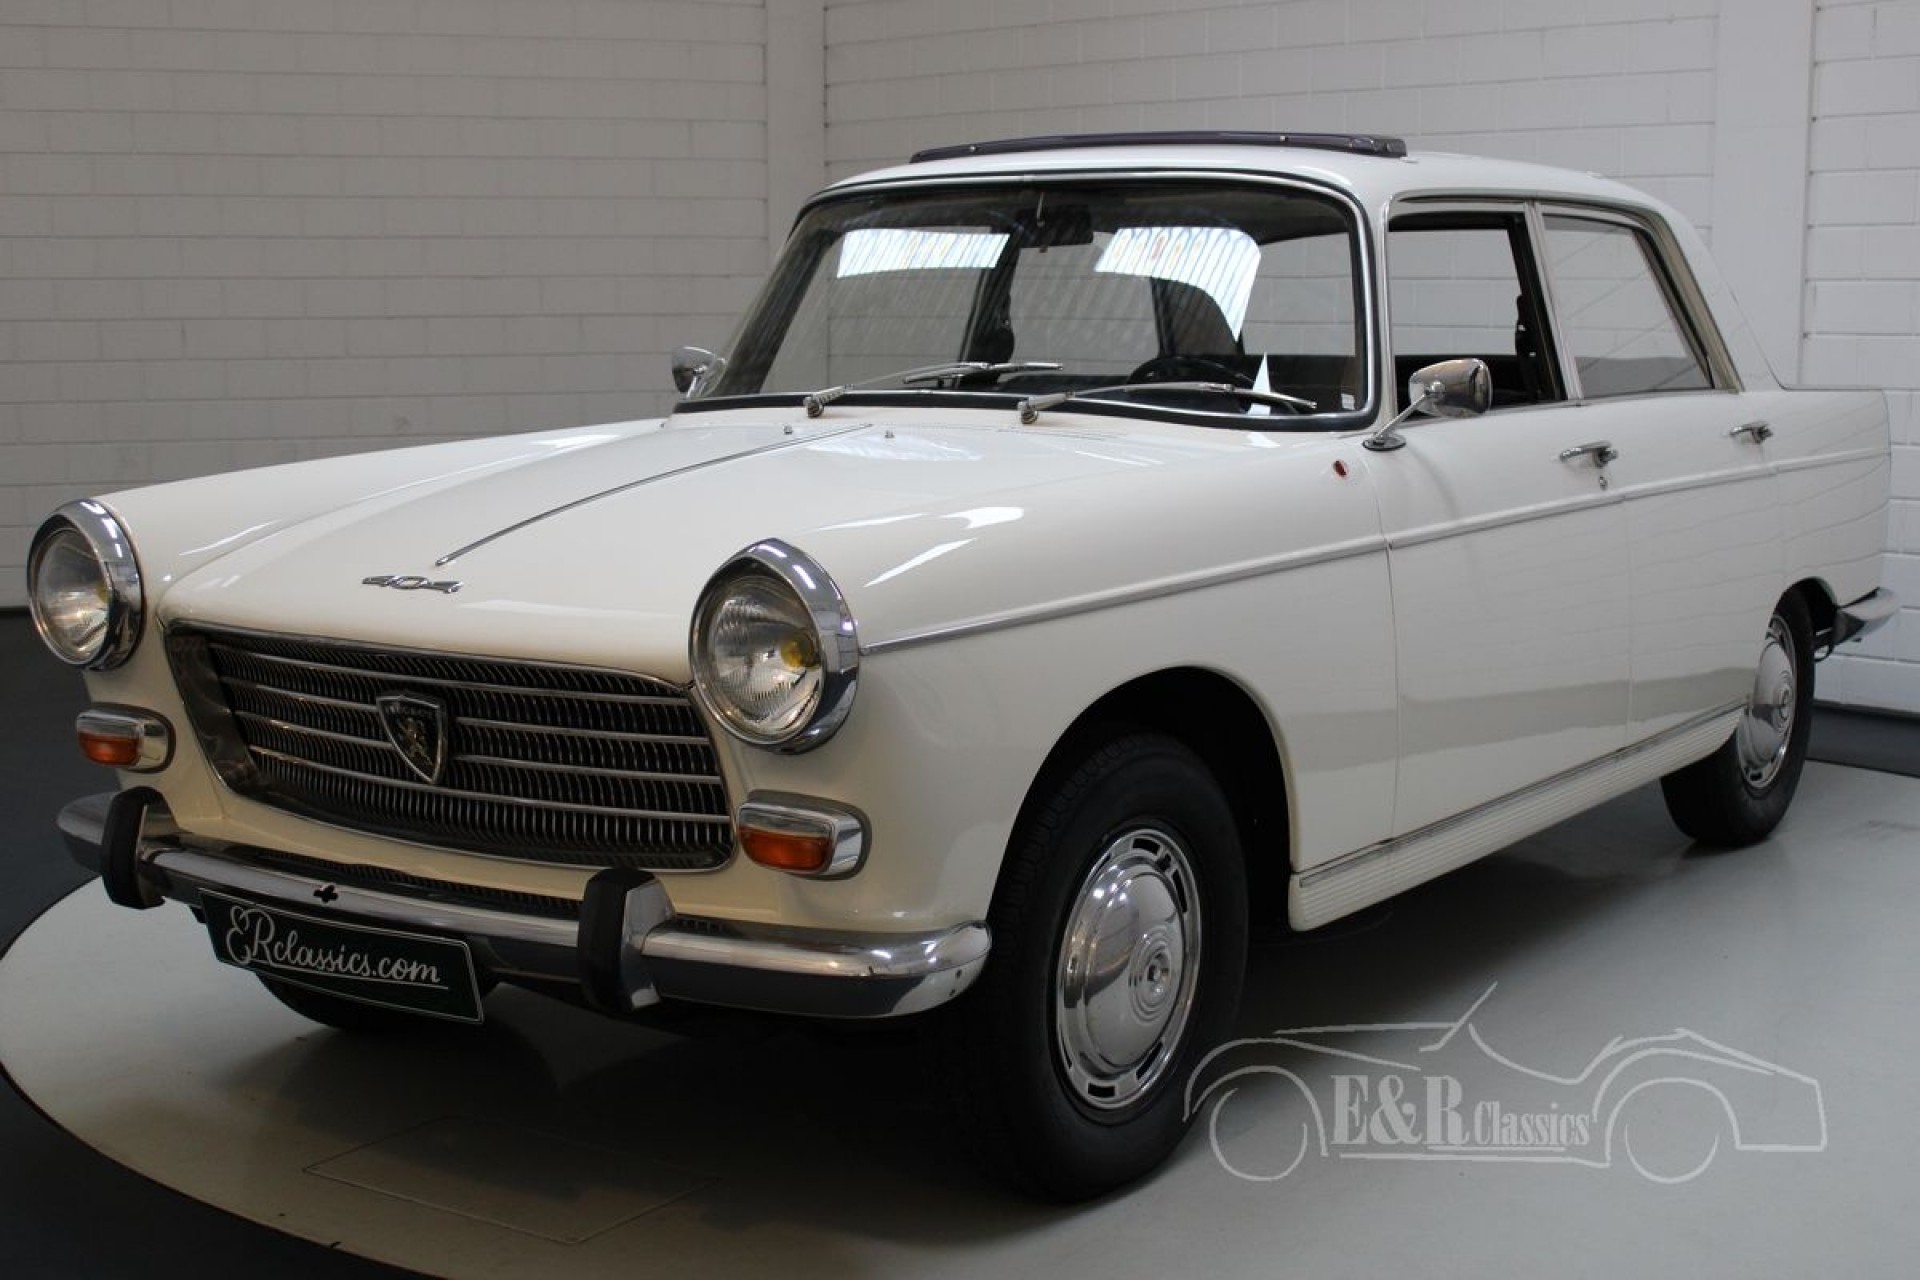 Peugeot 404 sunroof, automatic gearbox 1967 for sale at ERclassics